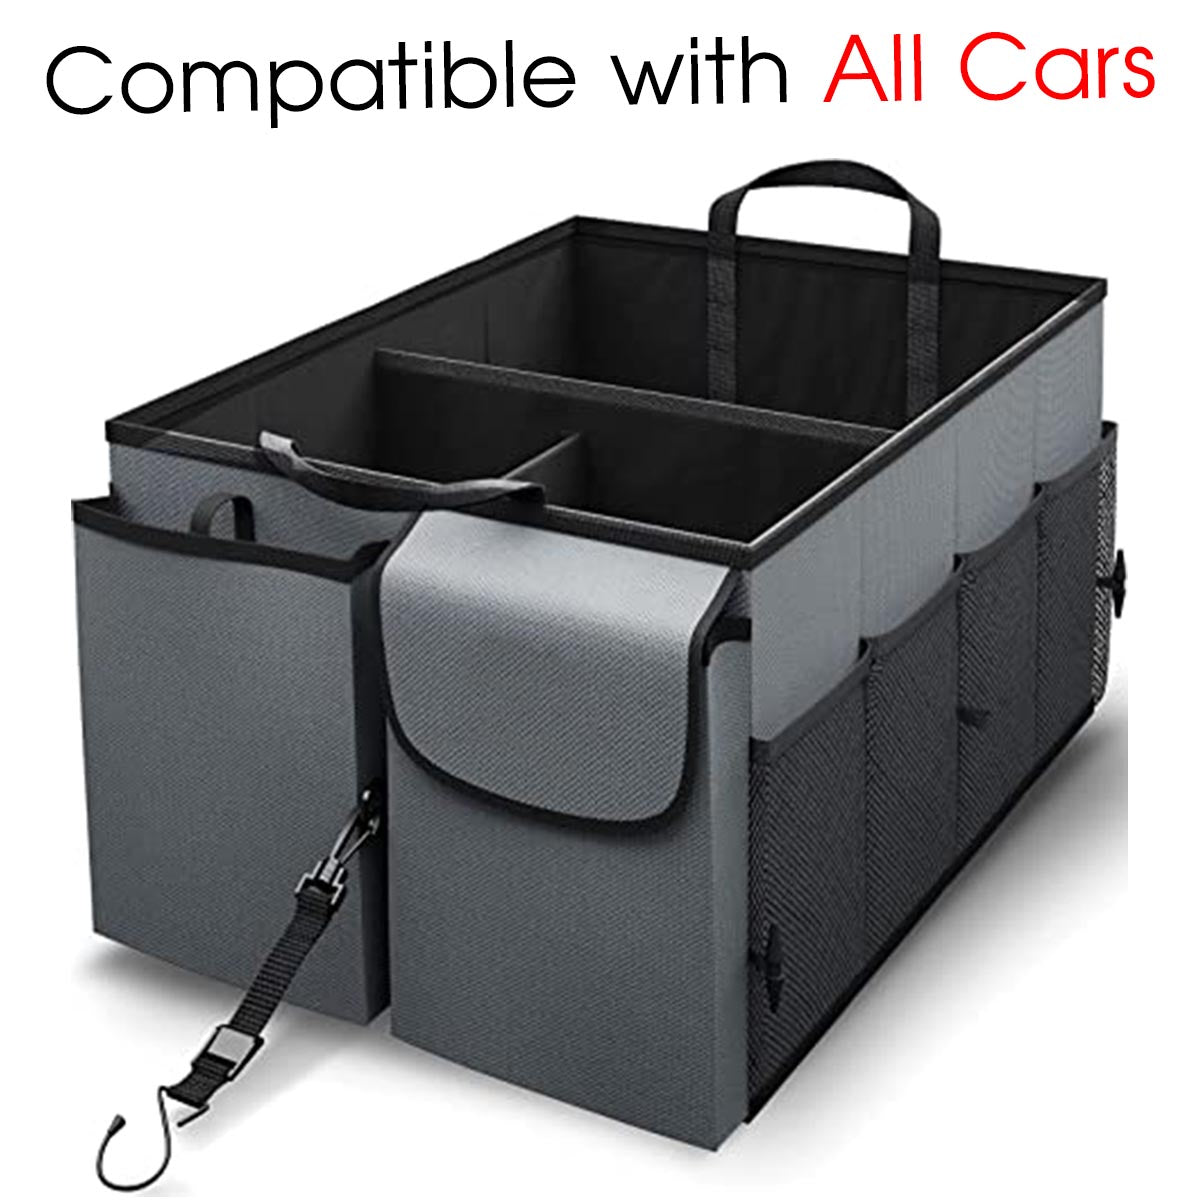 Car Trunk Organizer - Collapsible, Custom fit for All Cars, Multi-Compartment Automotive SUV Car Organizer for Storage w/ Adjustable Straps - Car Accessories for Women and Men JG12993